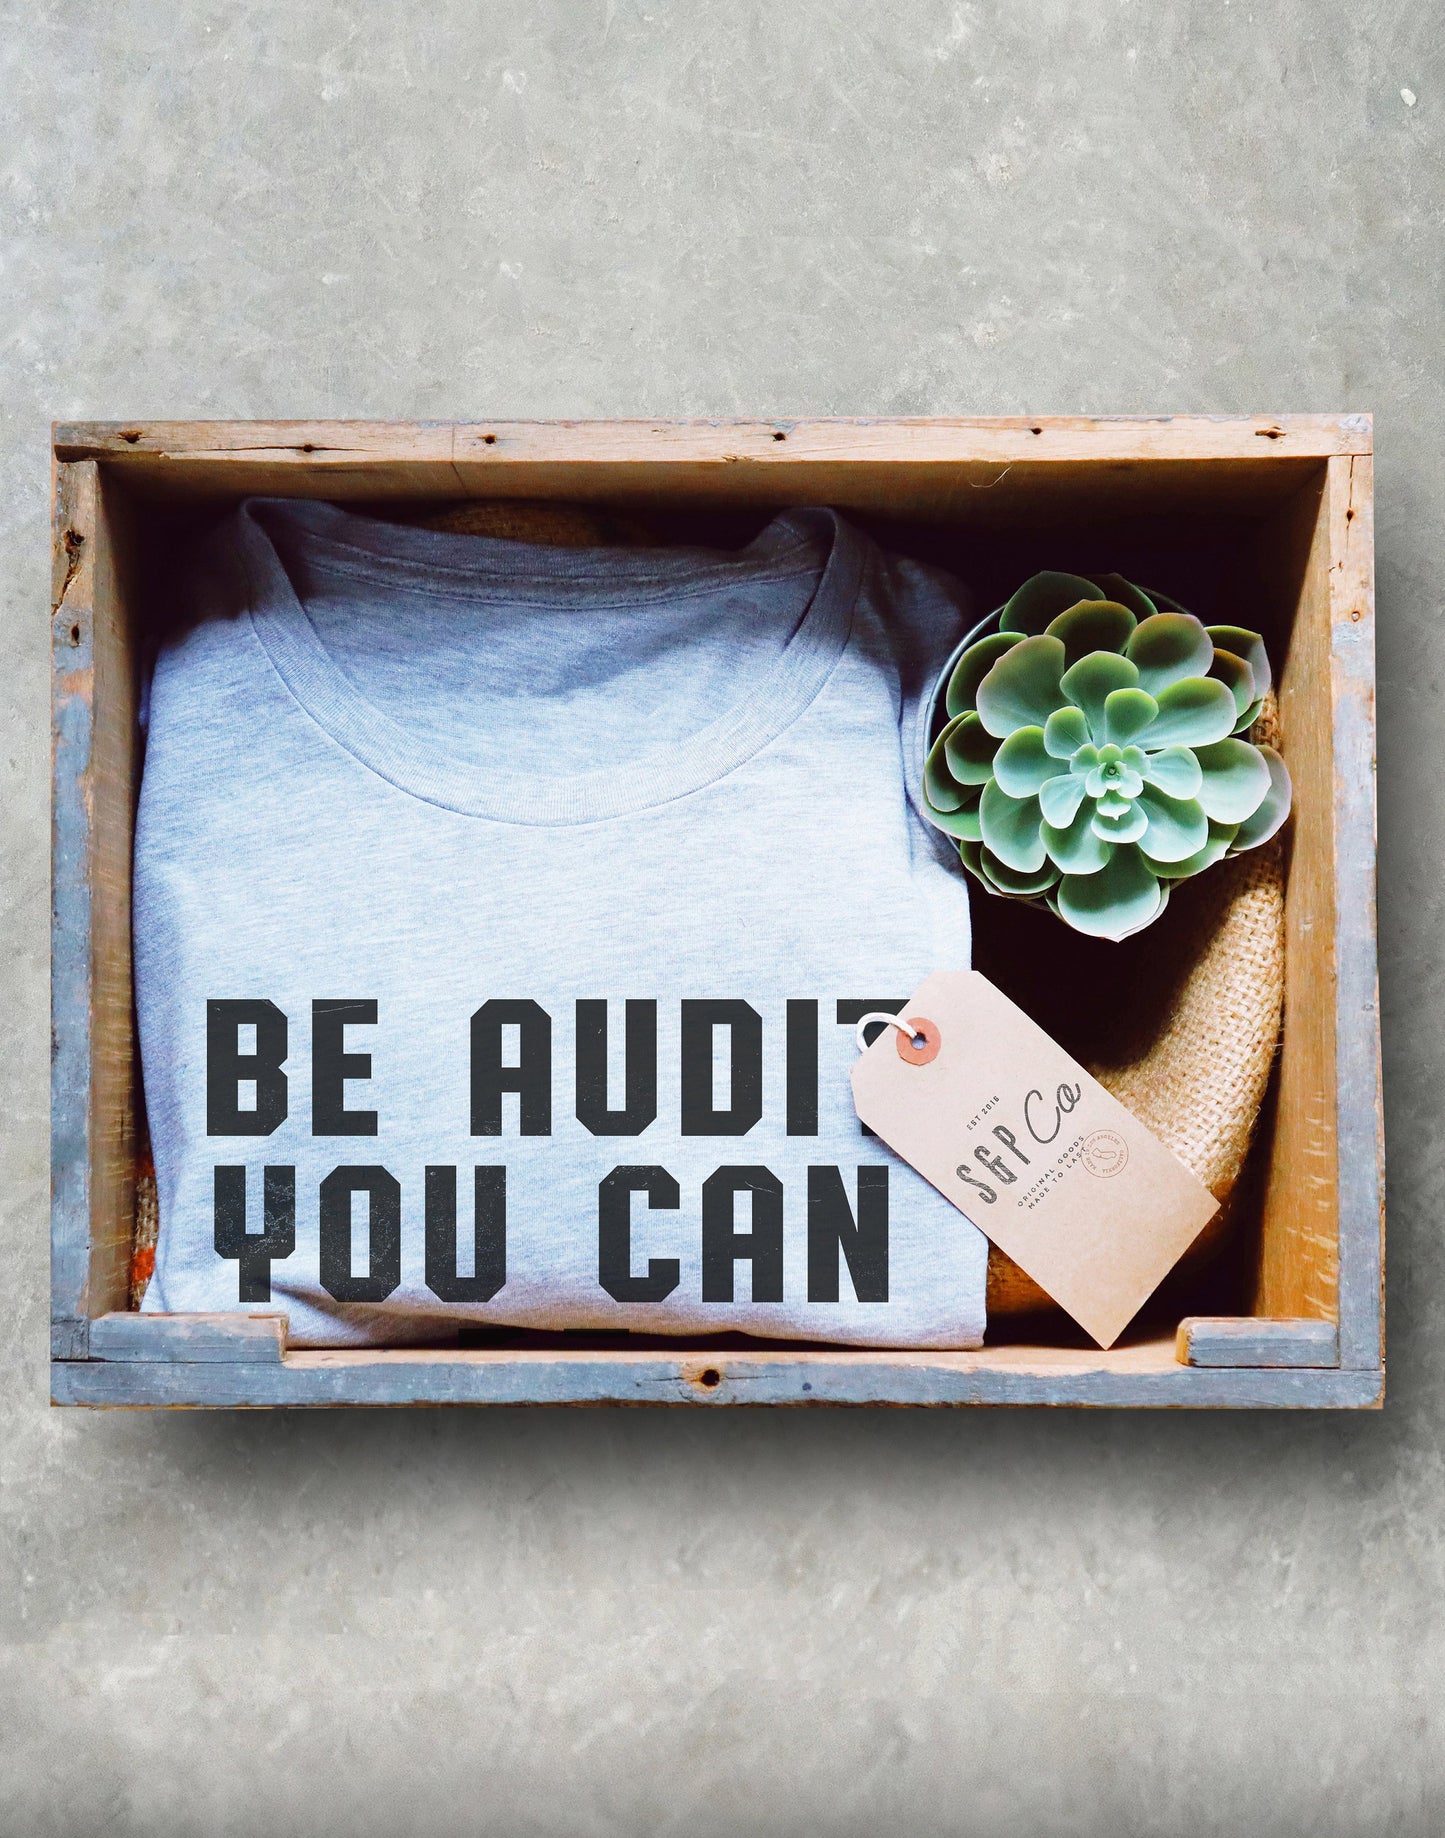 Be Audit You Can Be Unisex Shirt